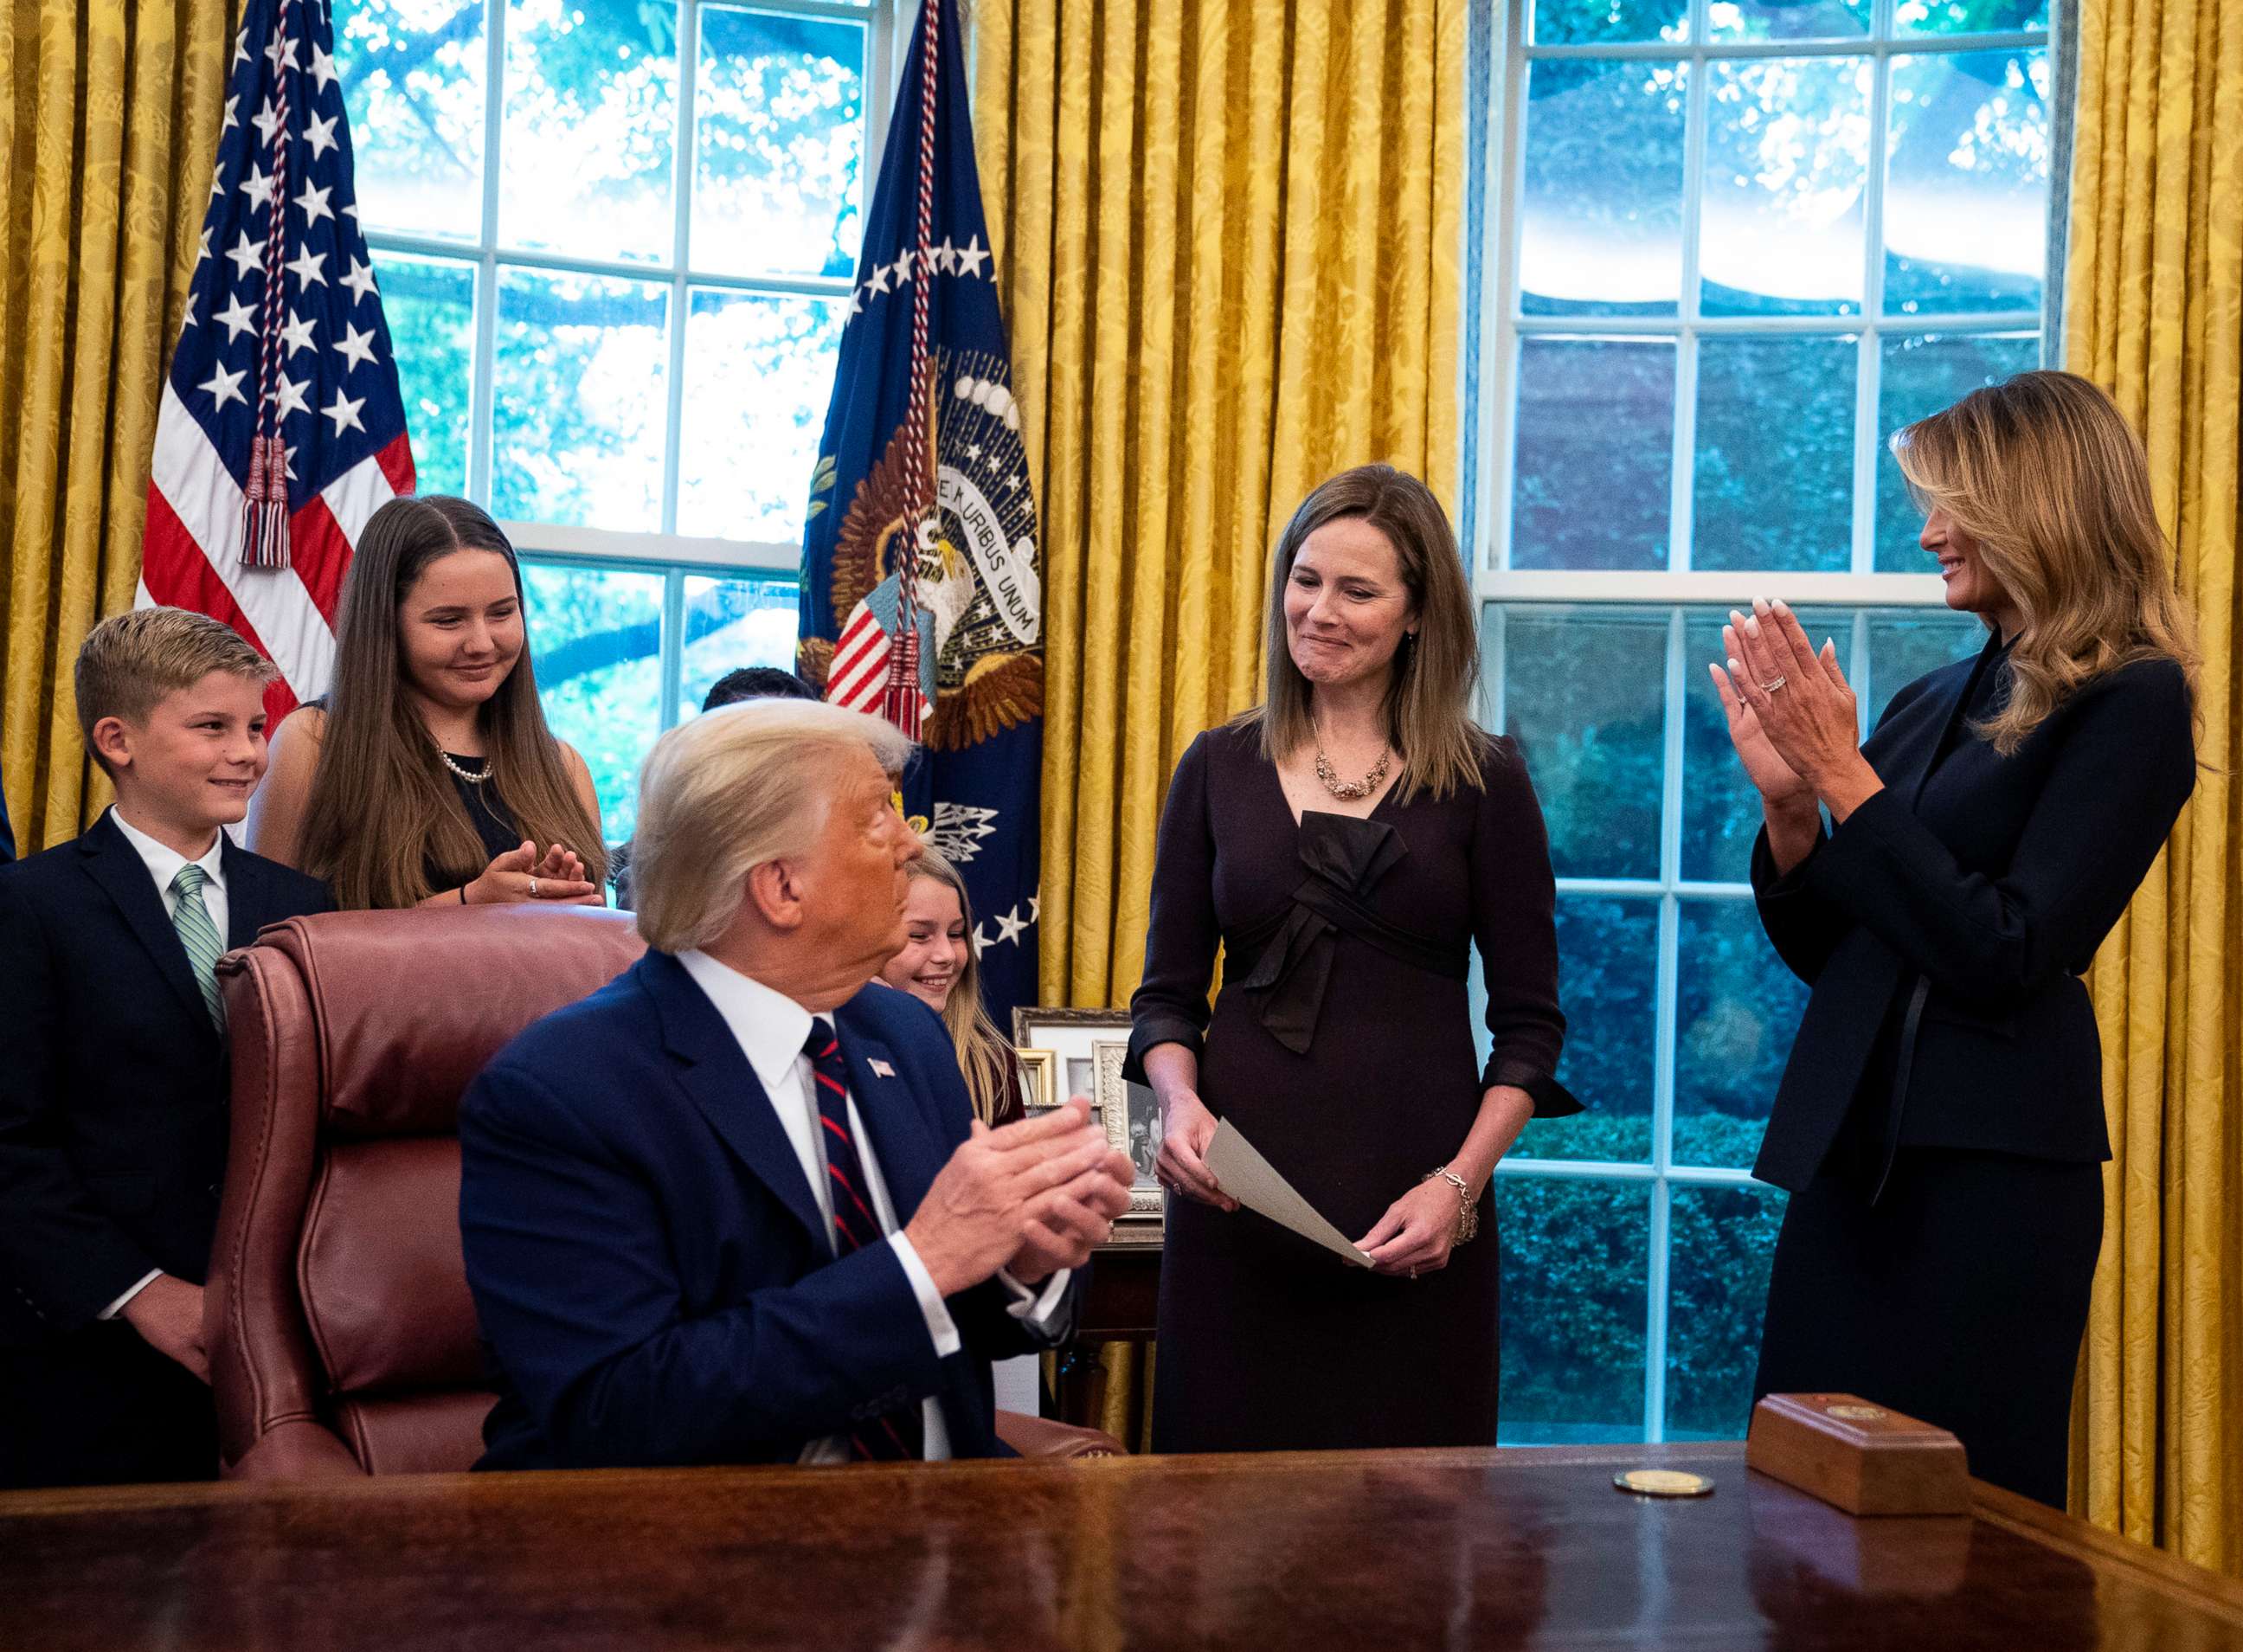 PHOTO: President Donald Trump and first lady Melania Trump with Judge Amy Coney Barrett and her family in the Oval Office of the White House, Sept. 26, 2020, prior to his public announcement in the Rose Garden.